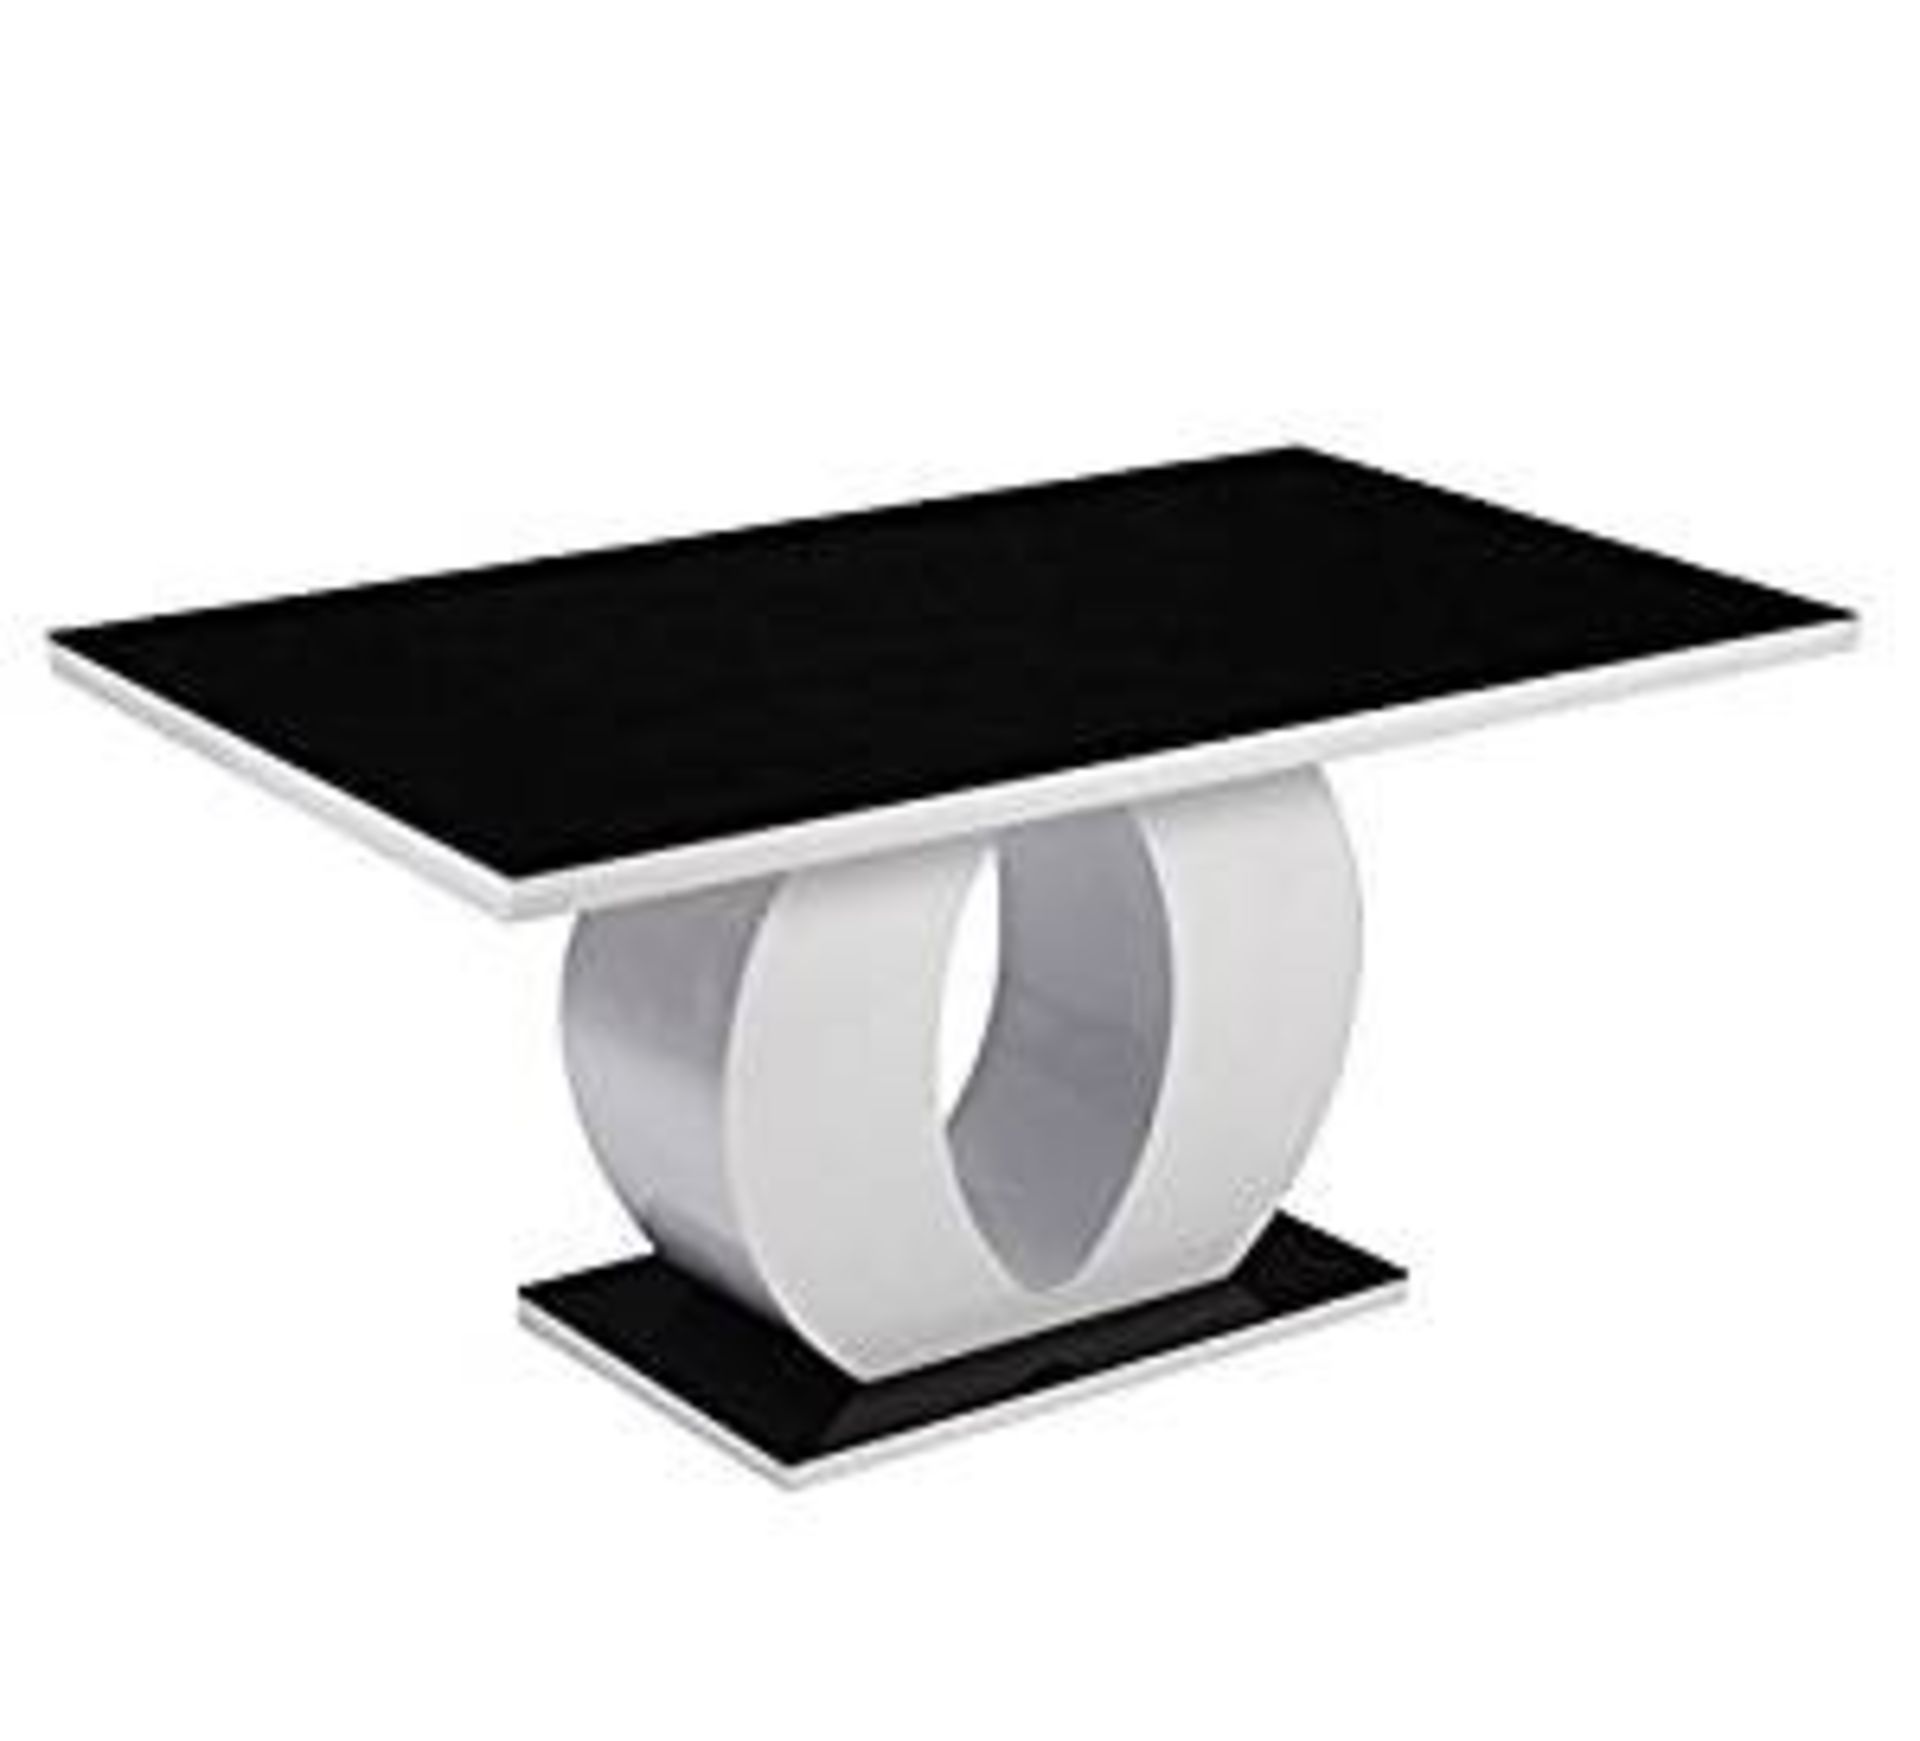 1 BOXED EDENHALL DINING TABLE IN BLACK AND WHITE (PUBLIC VIEWING AVAILABLE)